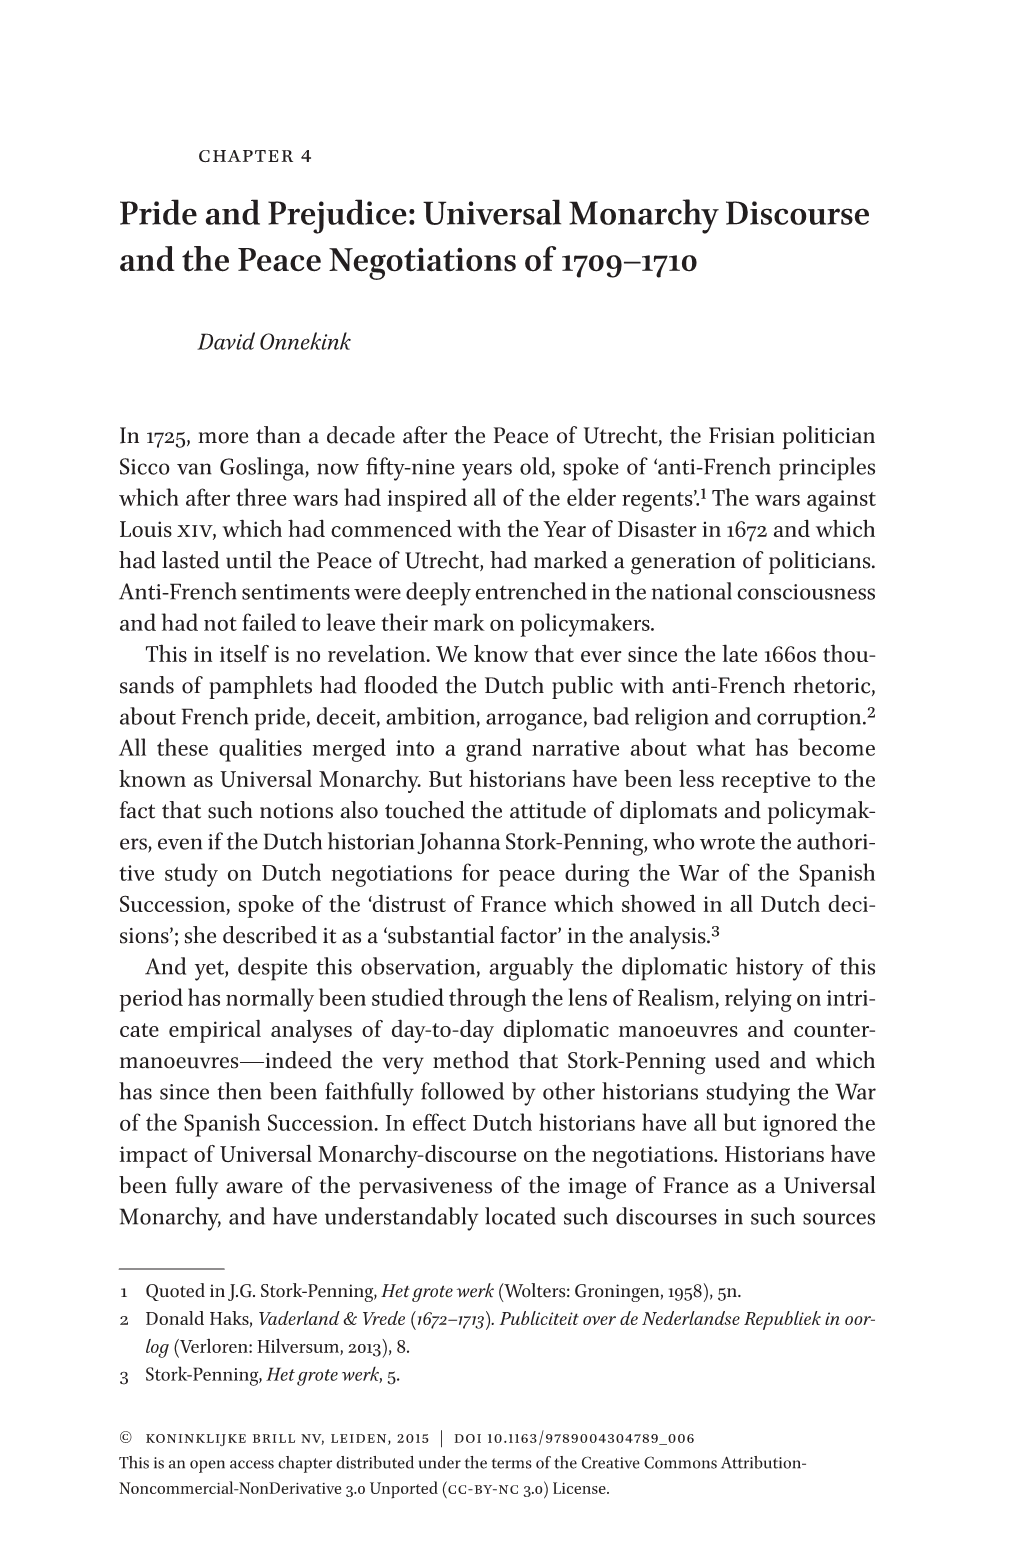 Pride and Prejudice: Universal Monarchy Discourse and the Peace Negotiations of 1709–1710